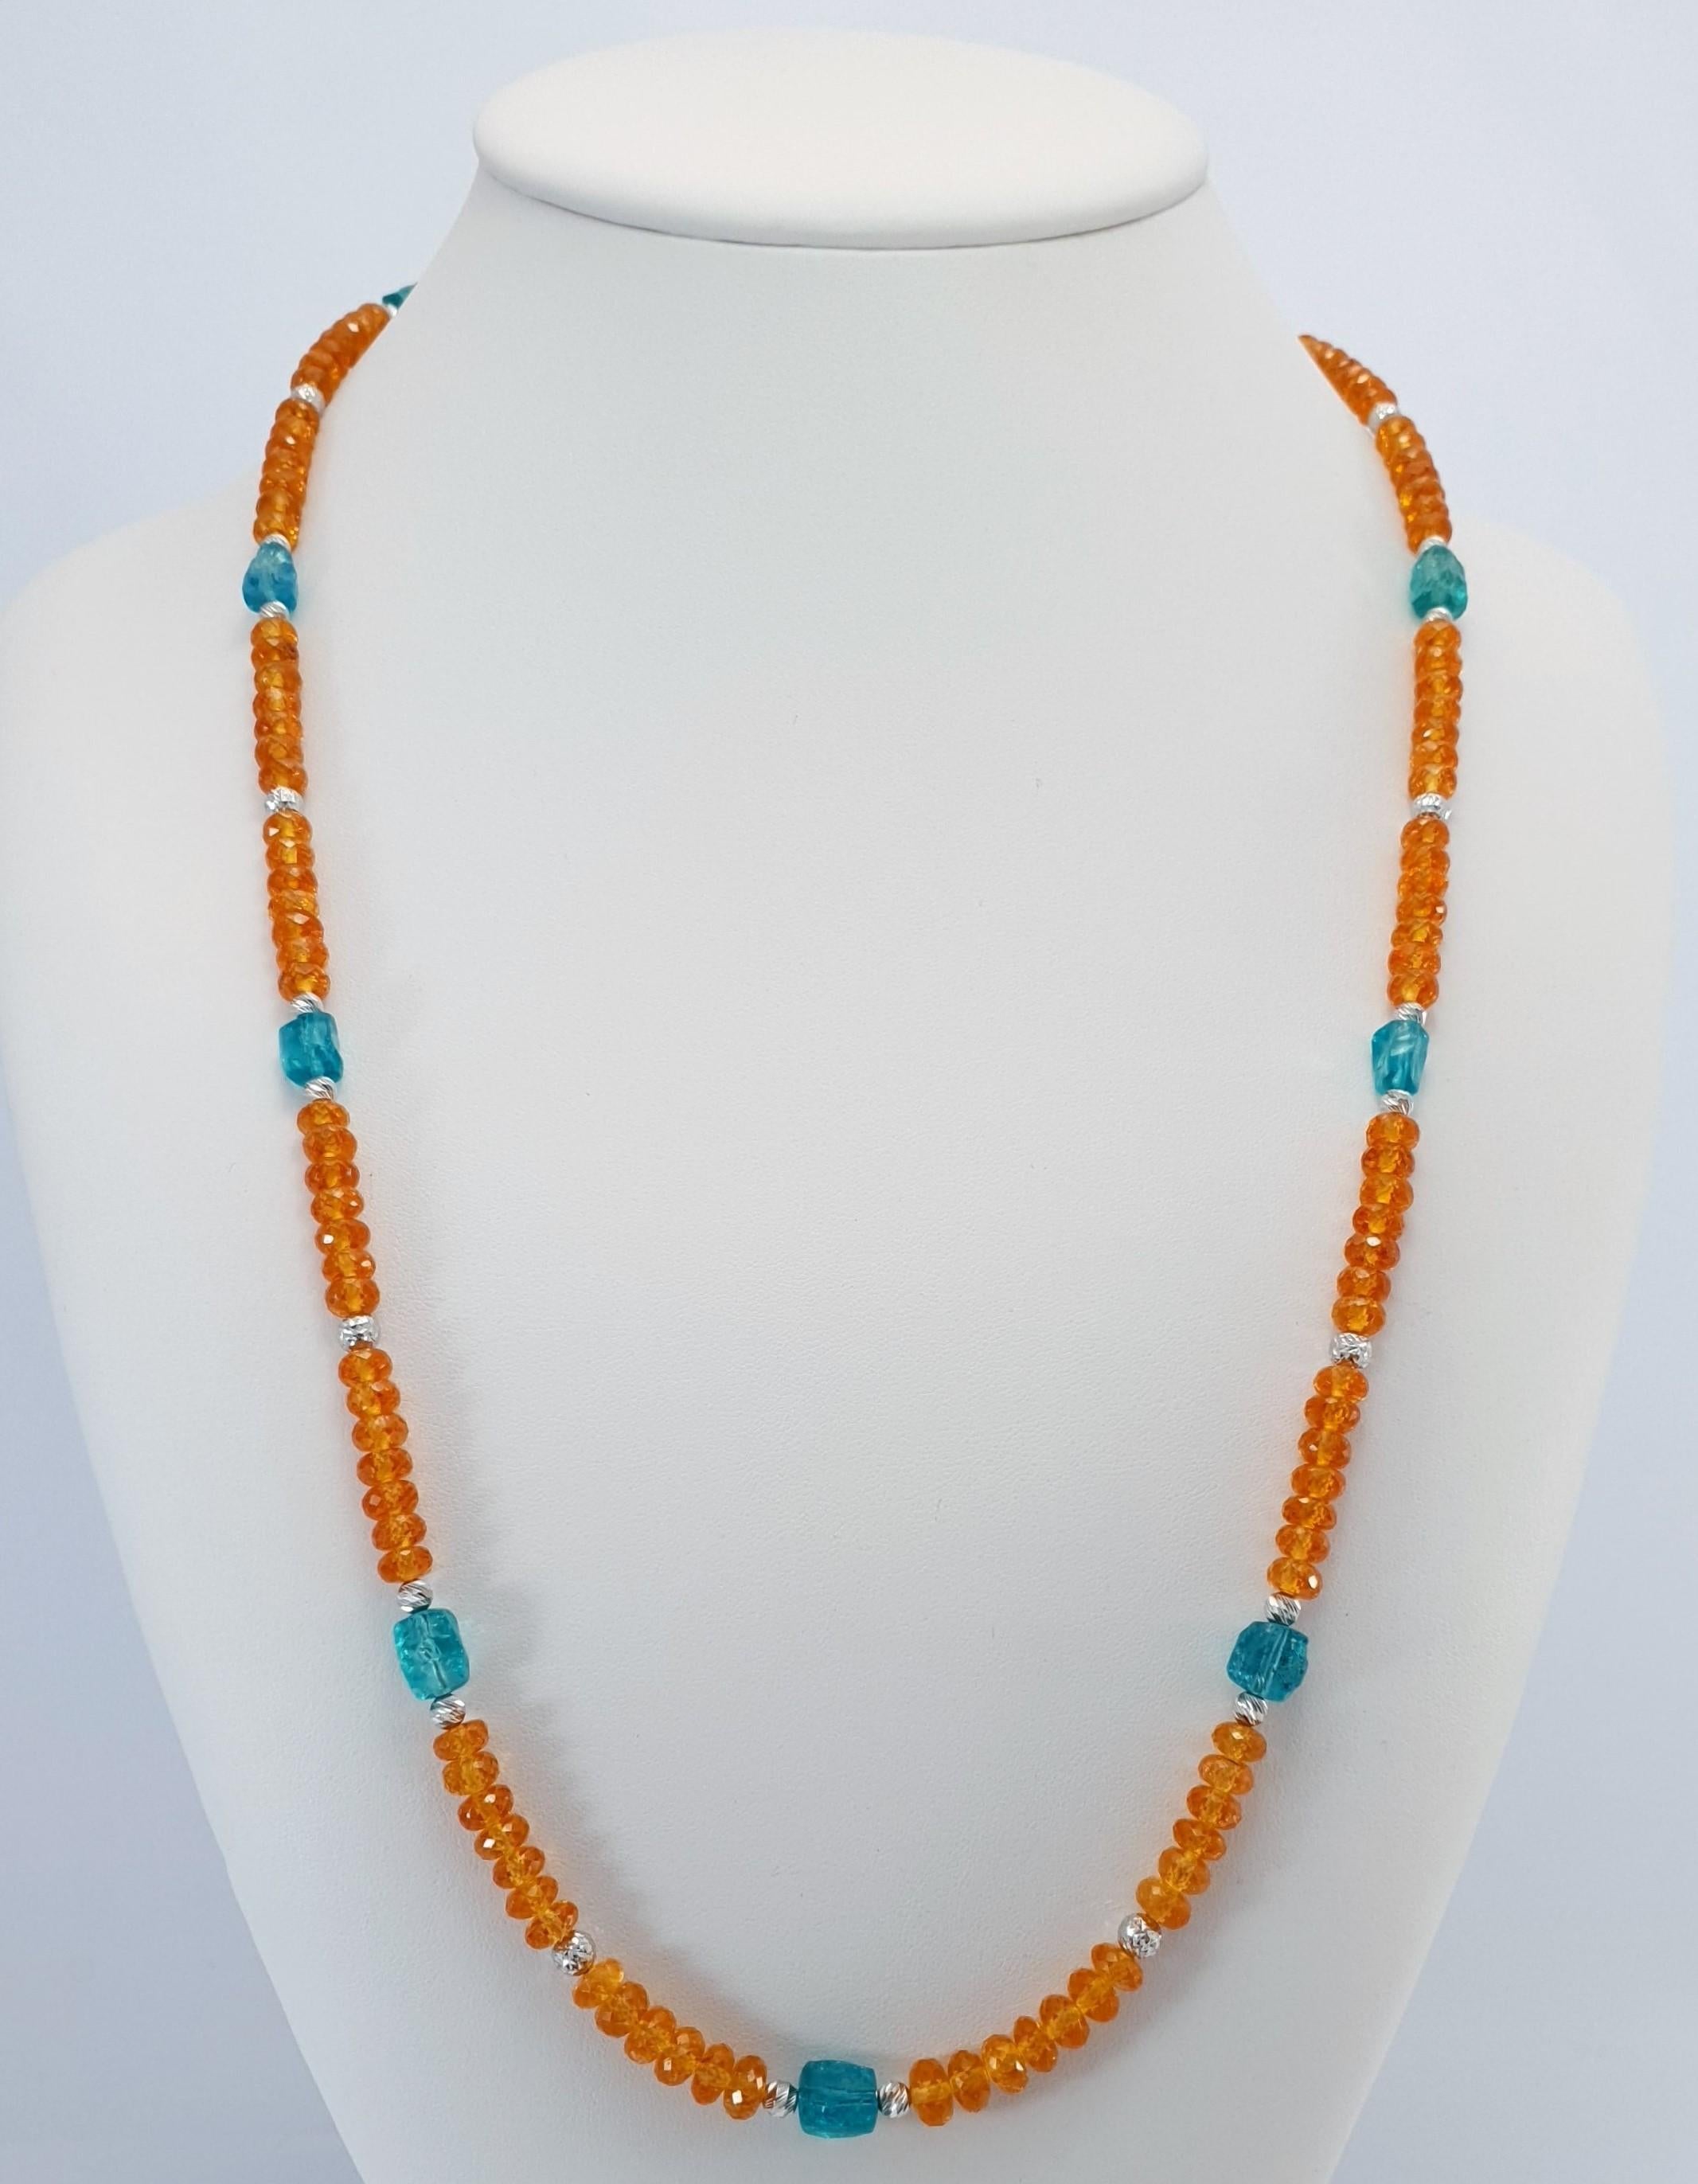 Women's Orange Garnets and Paraiba Color Apatite Beads Necklace with 18 Carat White Gold